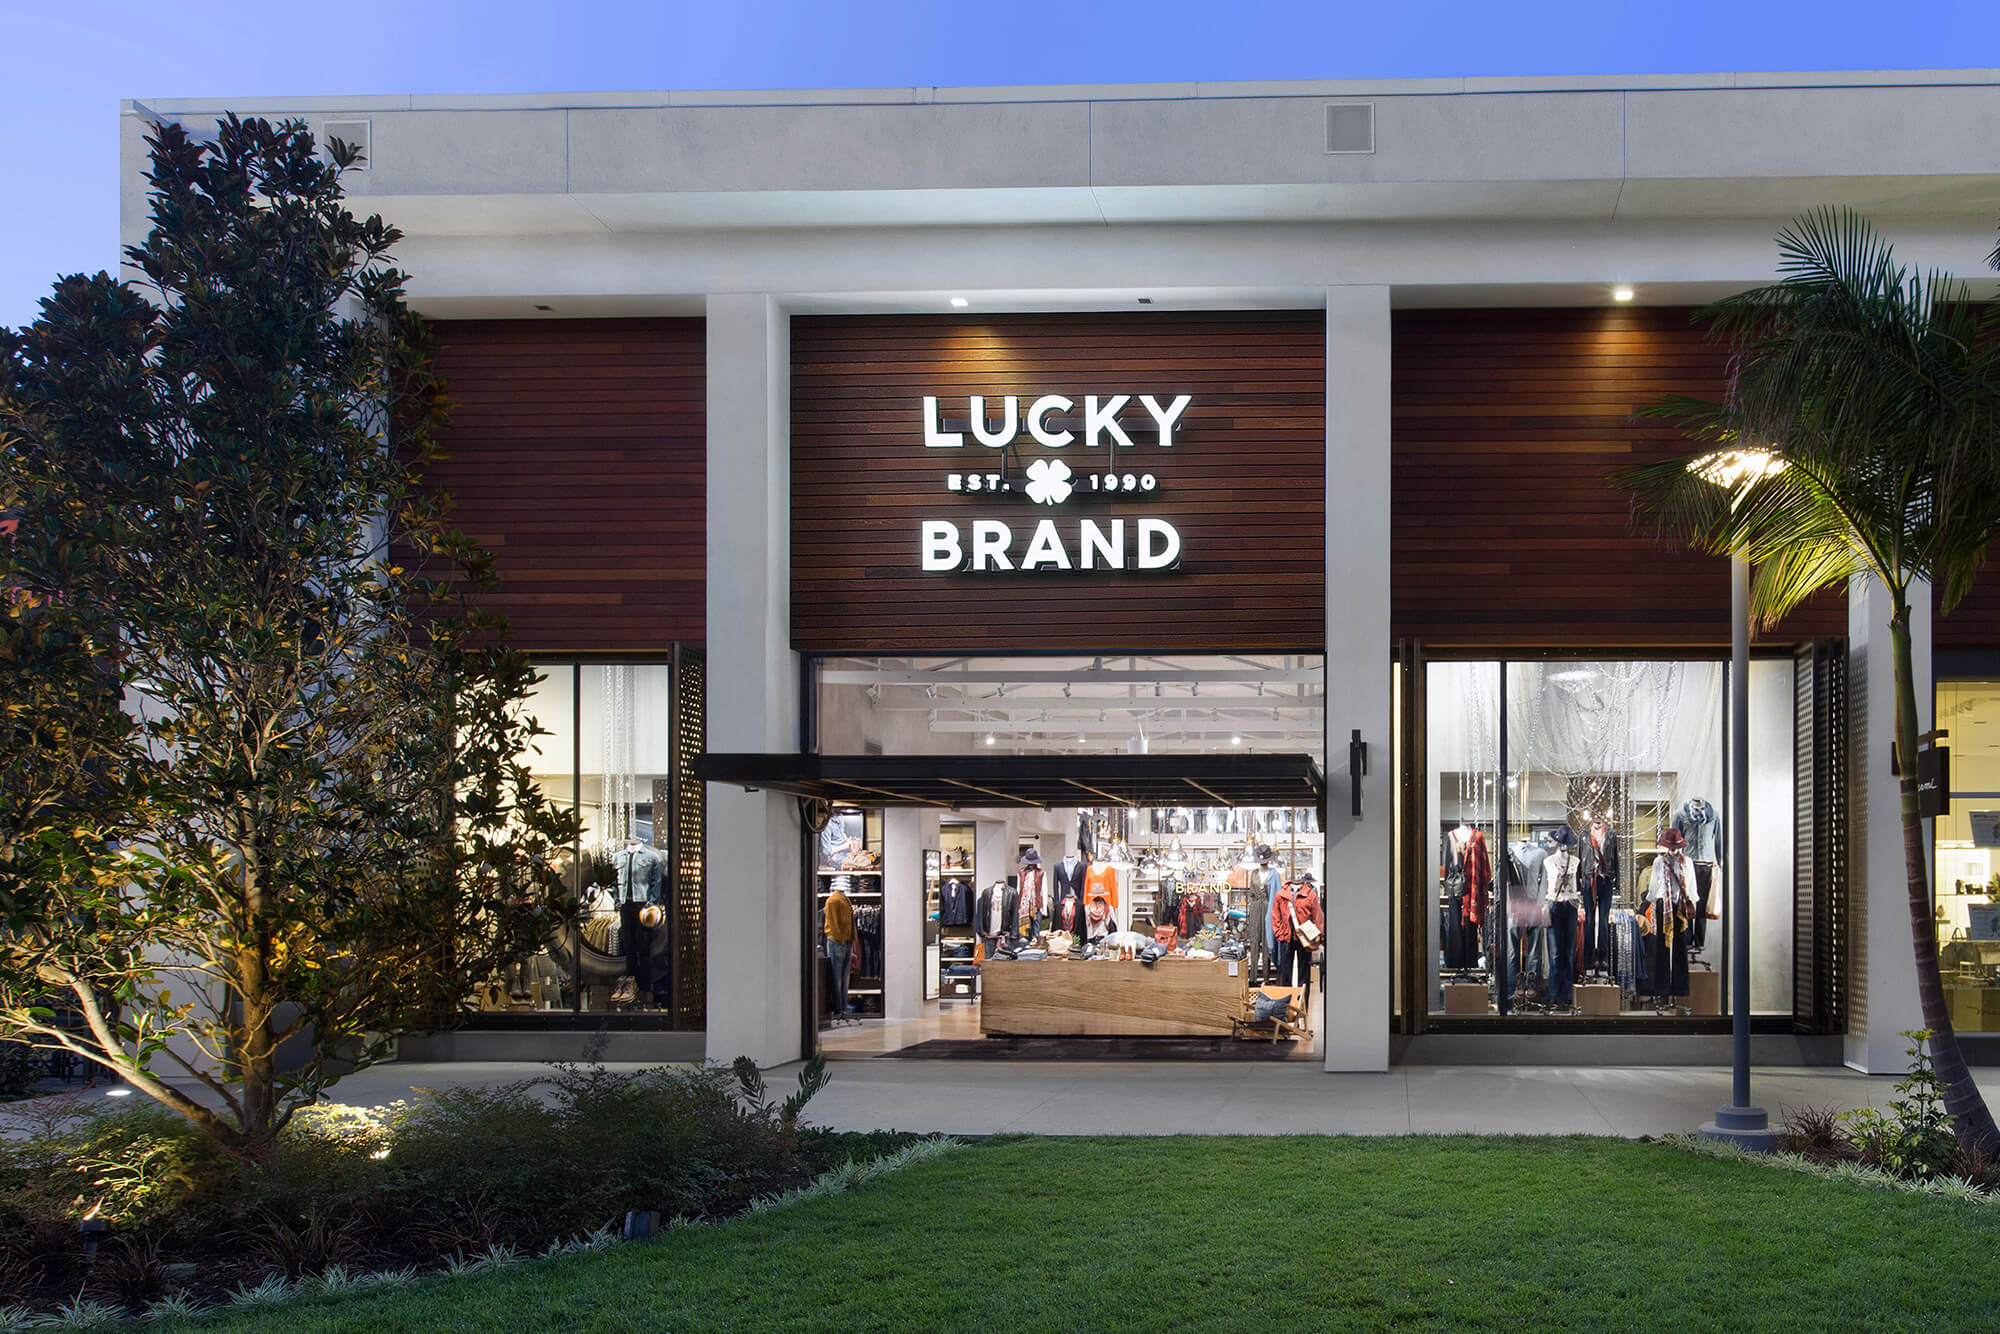 LUCKY BRAND, THE POINT